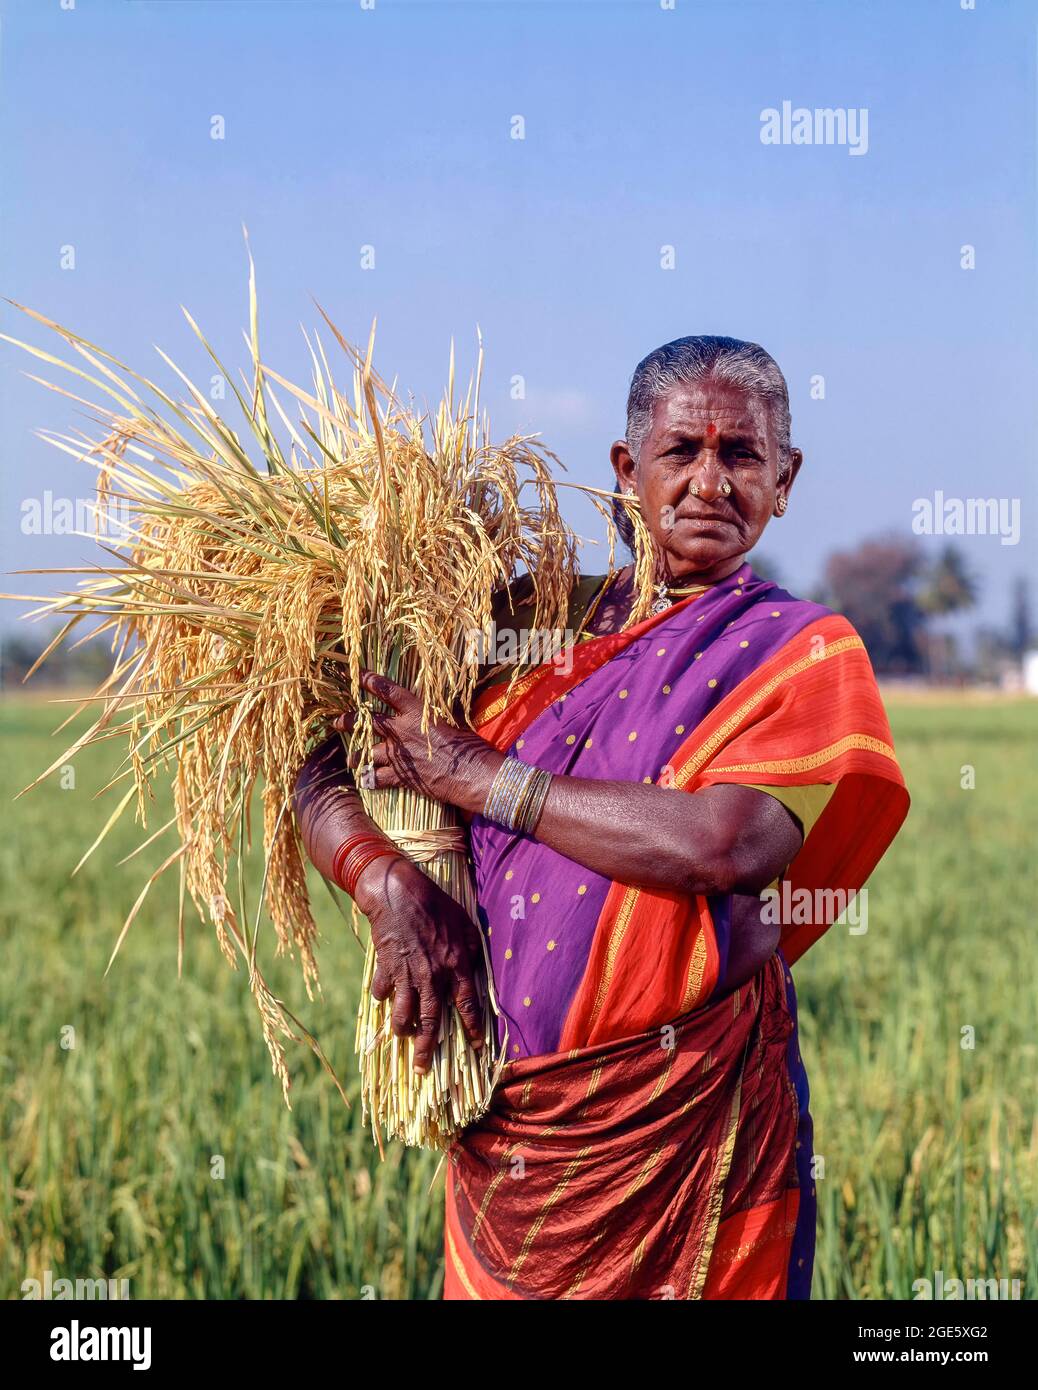 Old woman holding a bunch of sheaves with rice and standing in a rice field, Coimbatore, Tamil Nadu, India Stock Photo